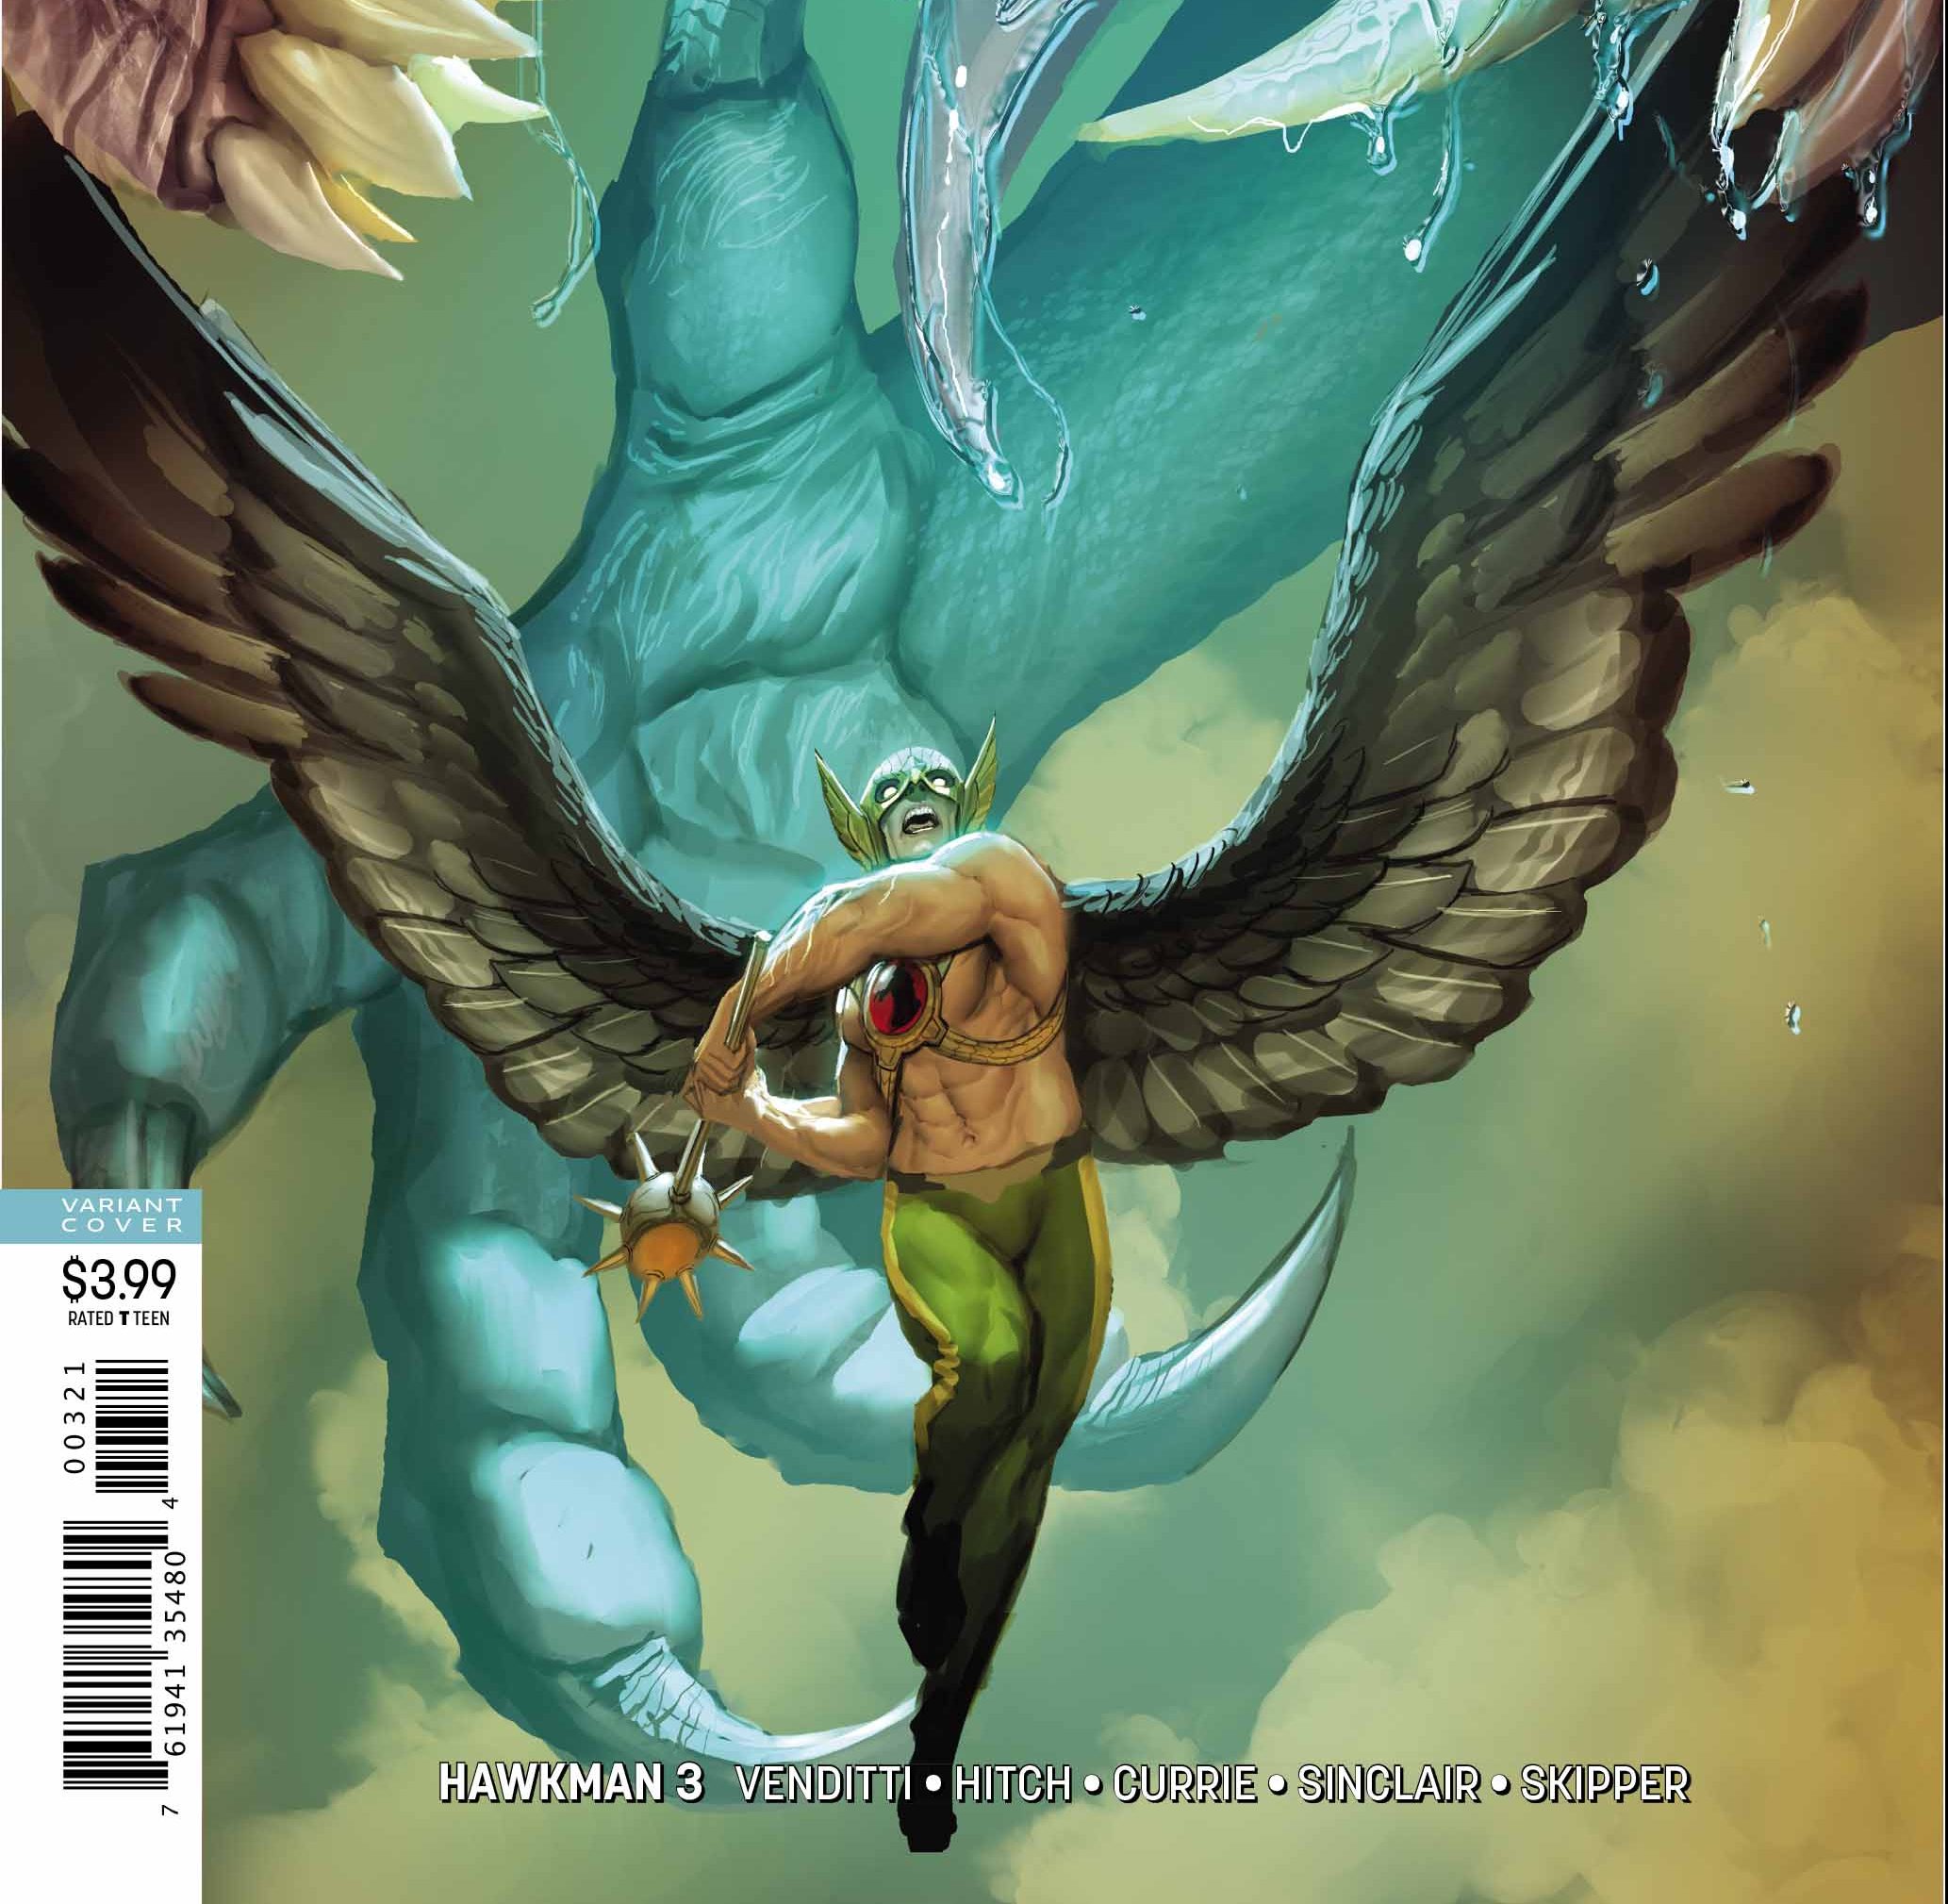 Hawkman #3 Review: Dino-soaring above the rest